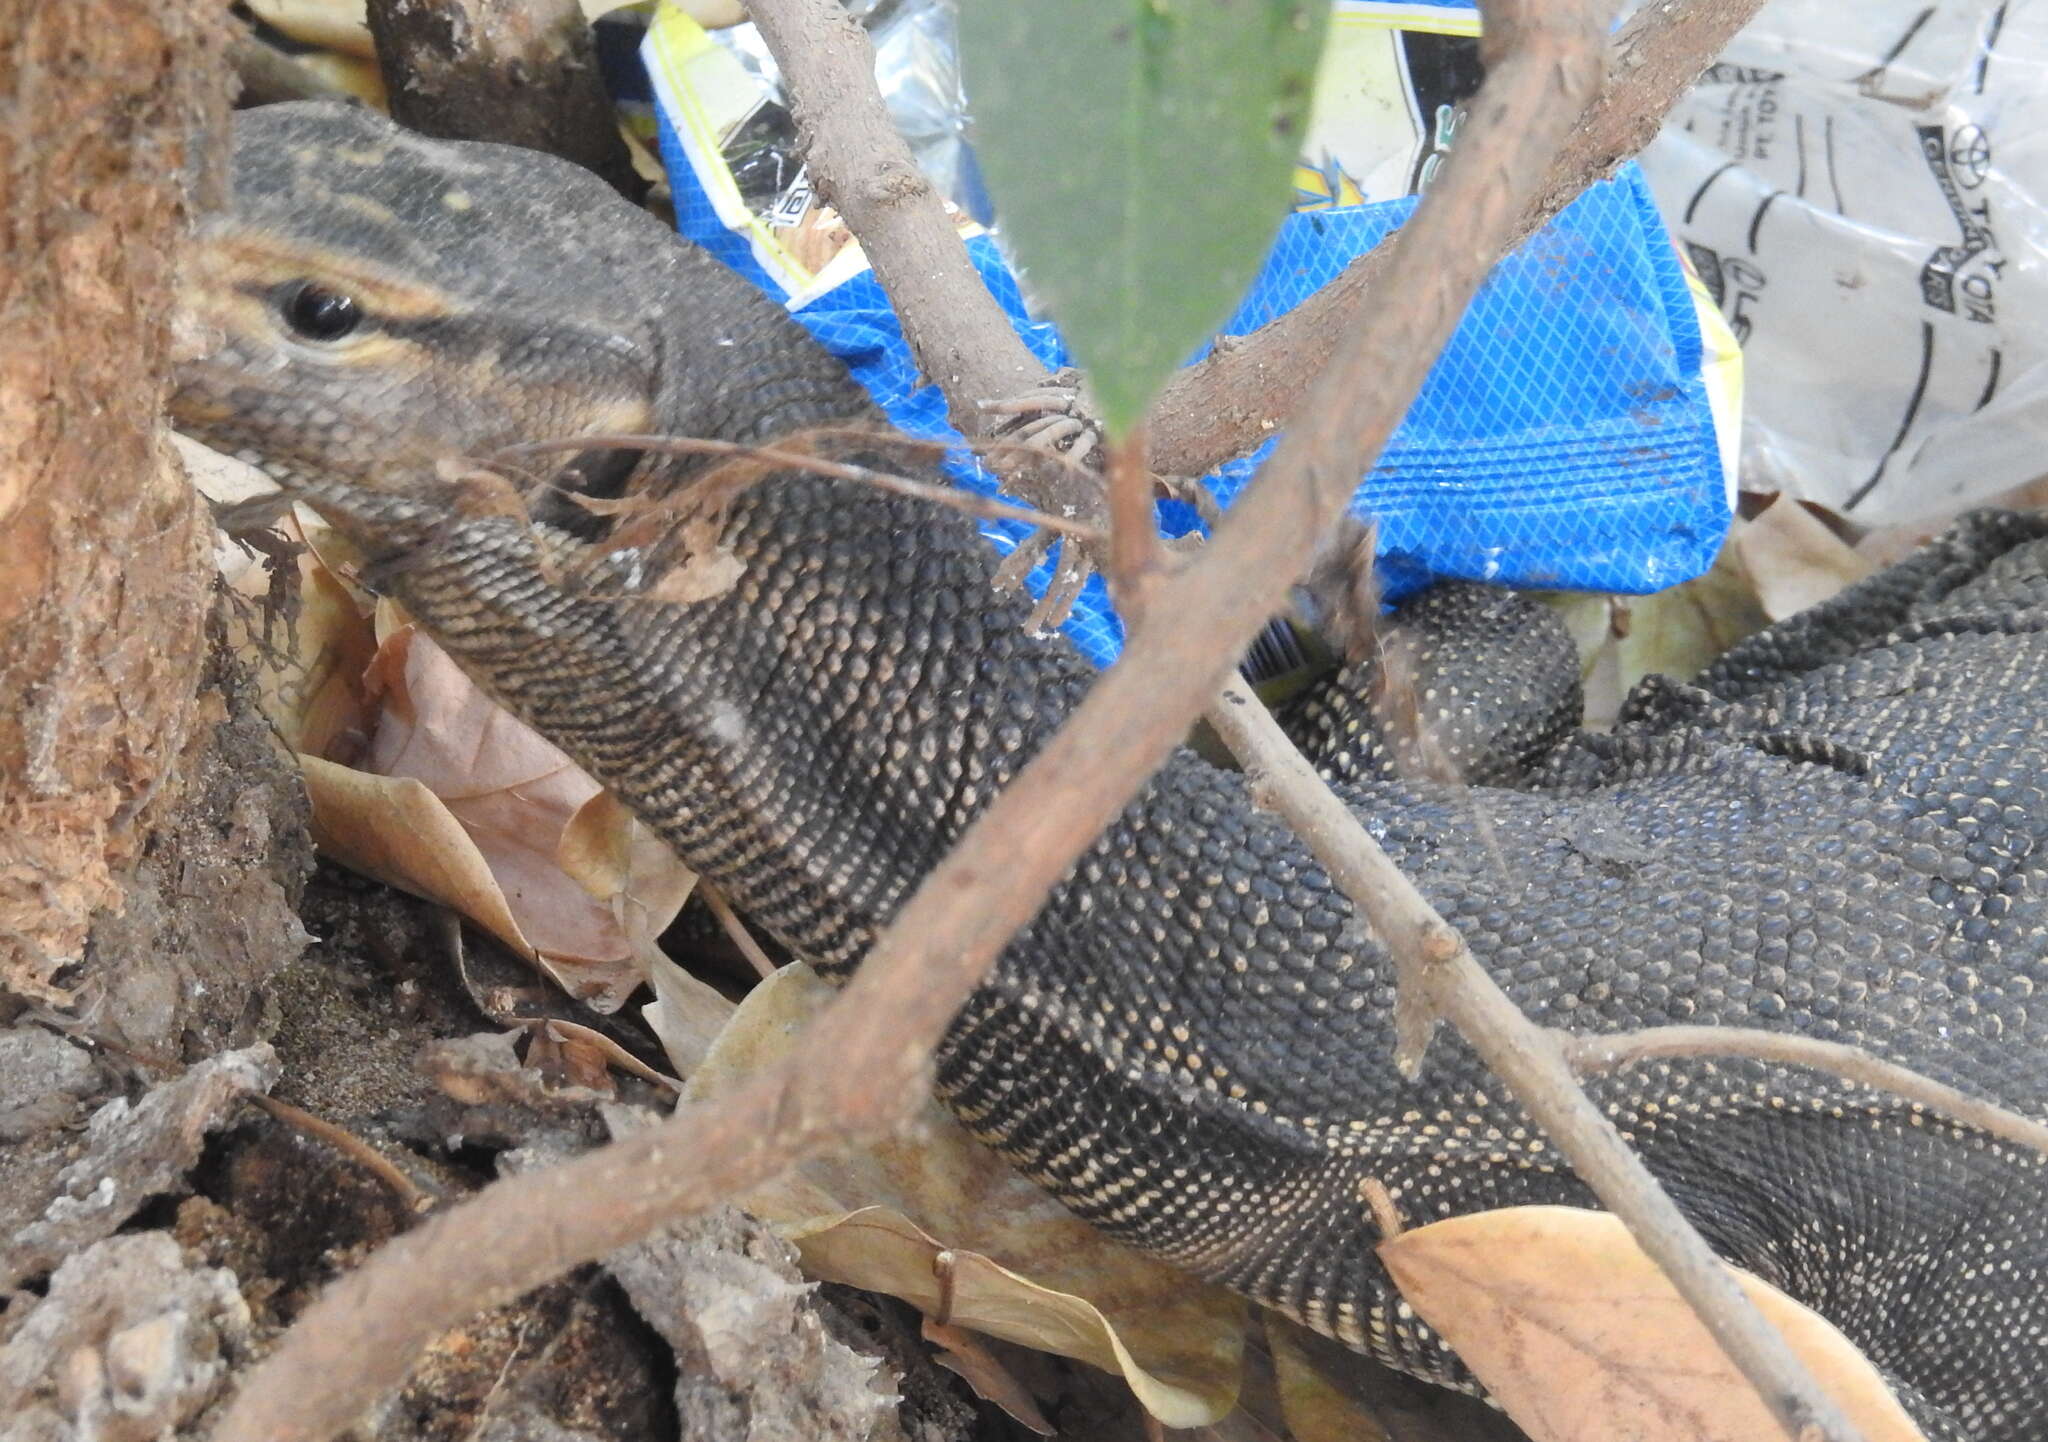 Image of Togian Water Monitor